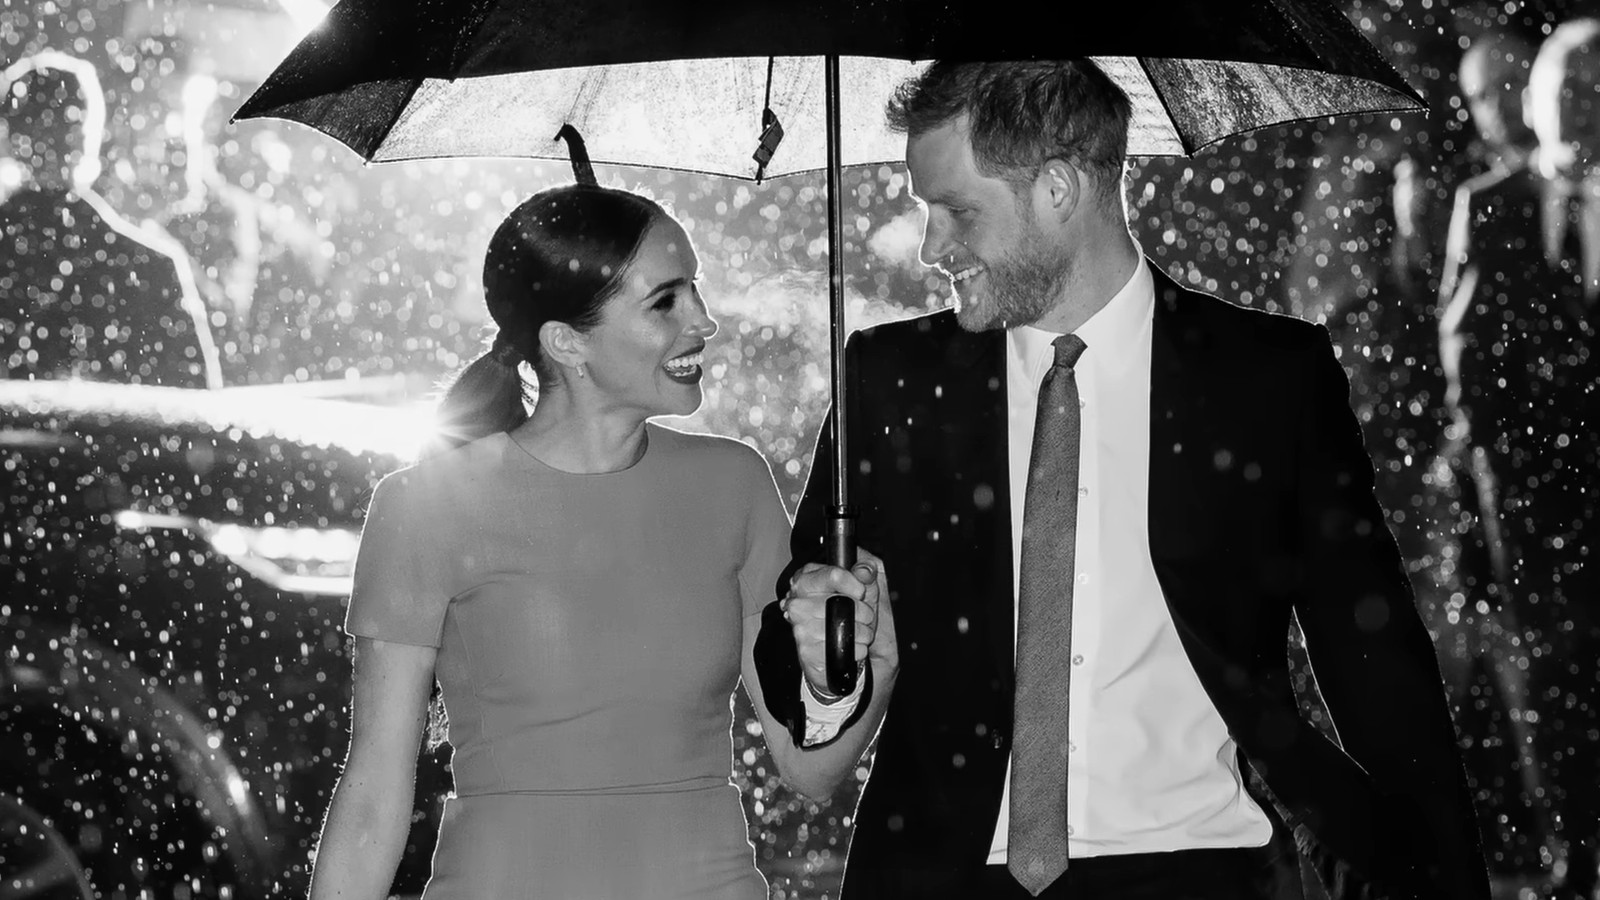 Prince Harry and Meghan Markle promise their side of the story in Netflix doc teaser